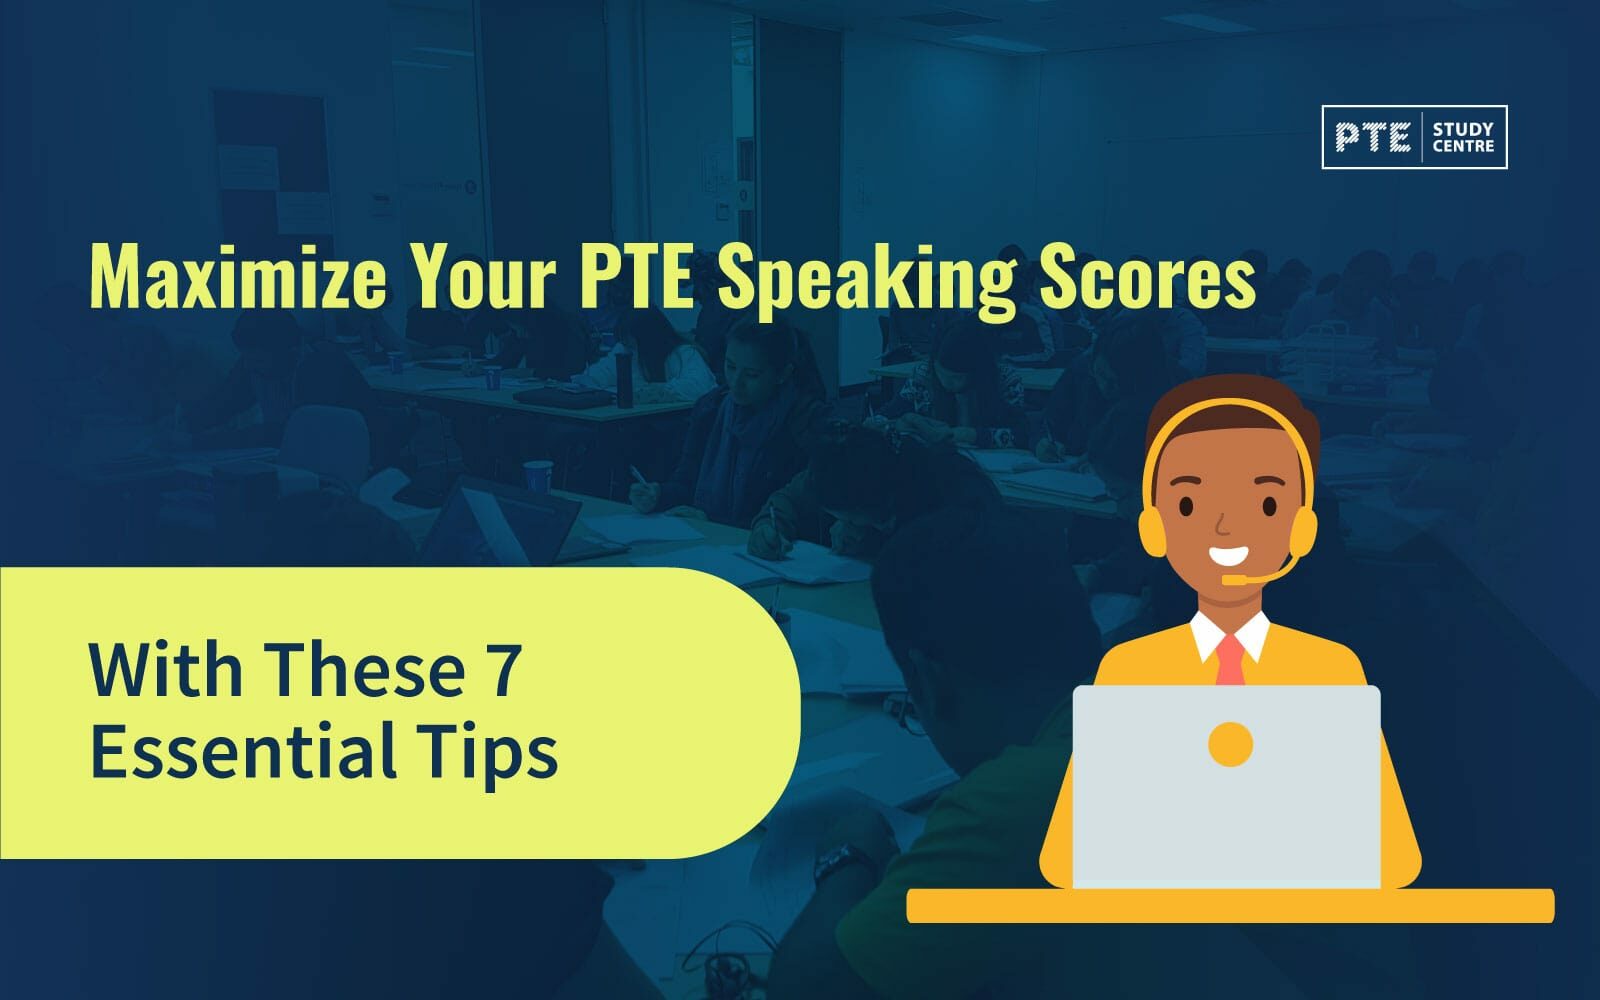 Maximize Your PTE Speaking Scores with These 7 Essential Tips